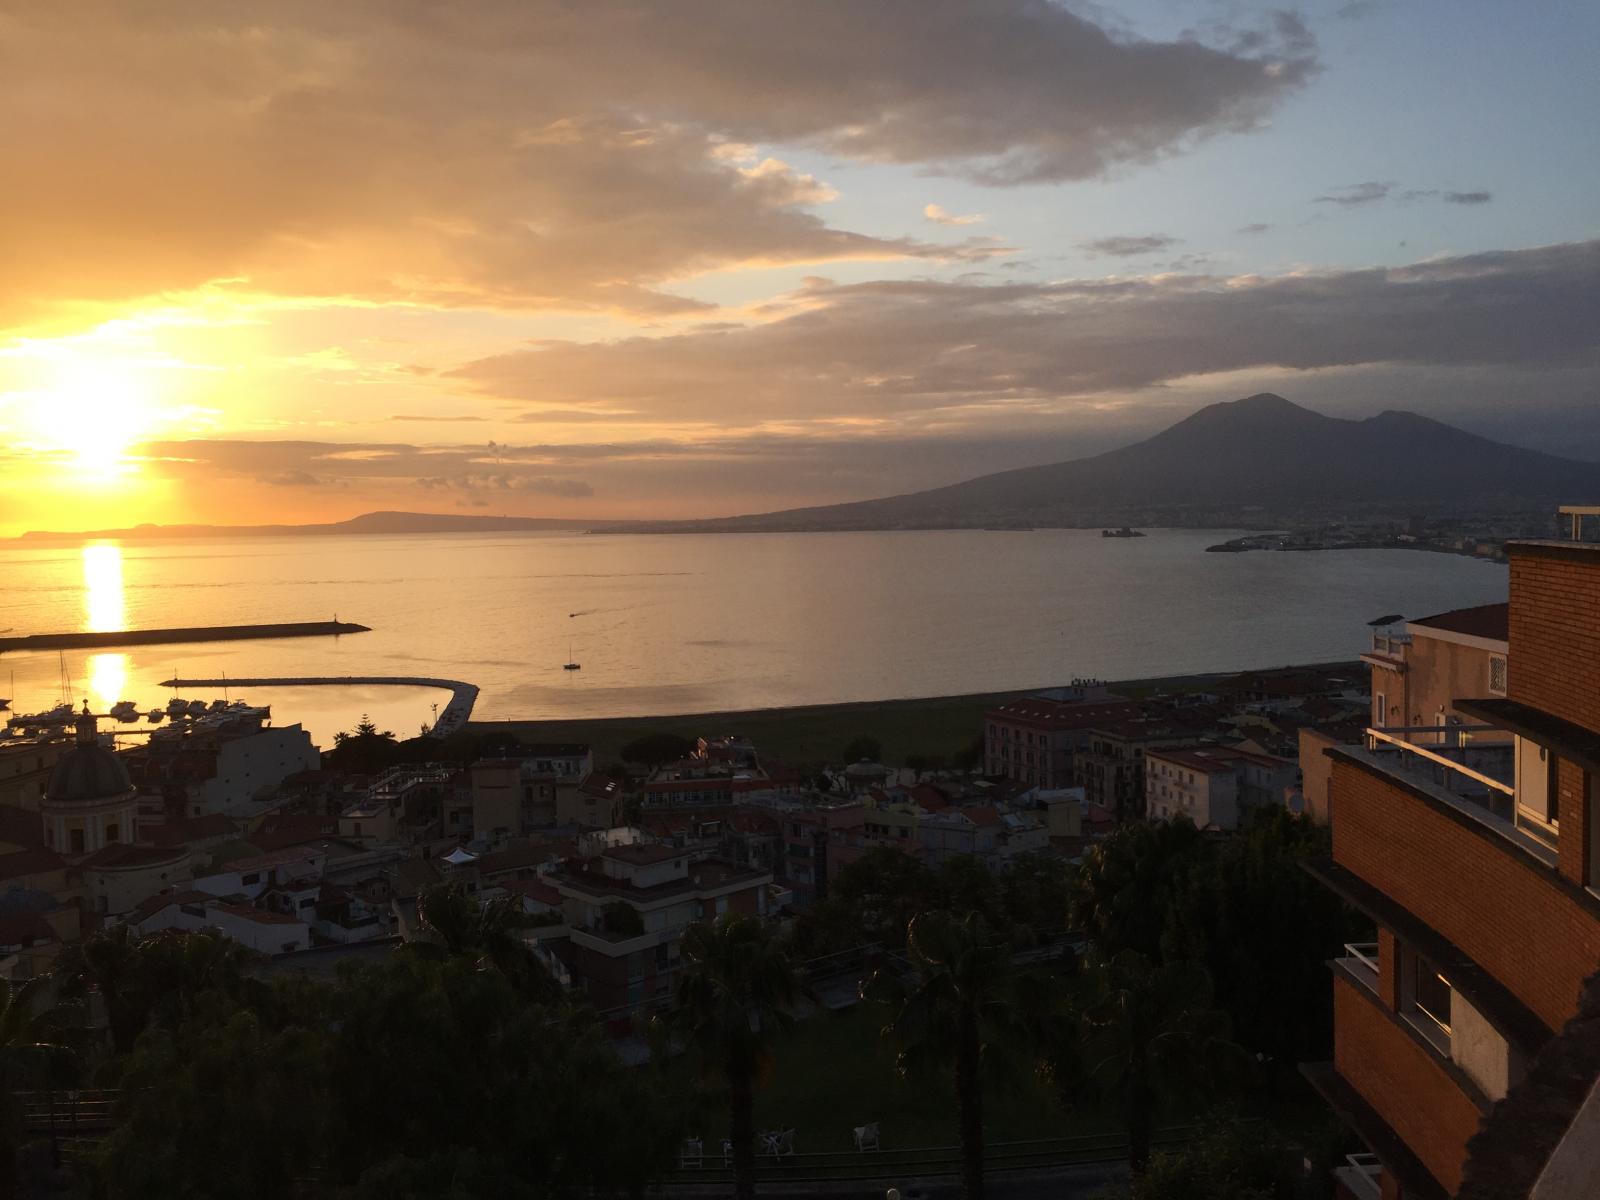 The view of Mount Vesuvius and the Bay of Naples from the Vesuvian Institute, where we eat, sleep, and learn.